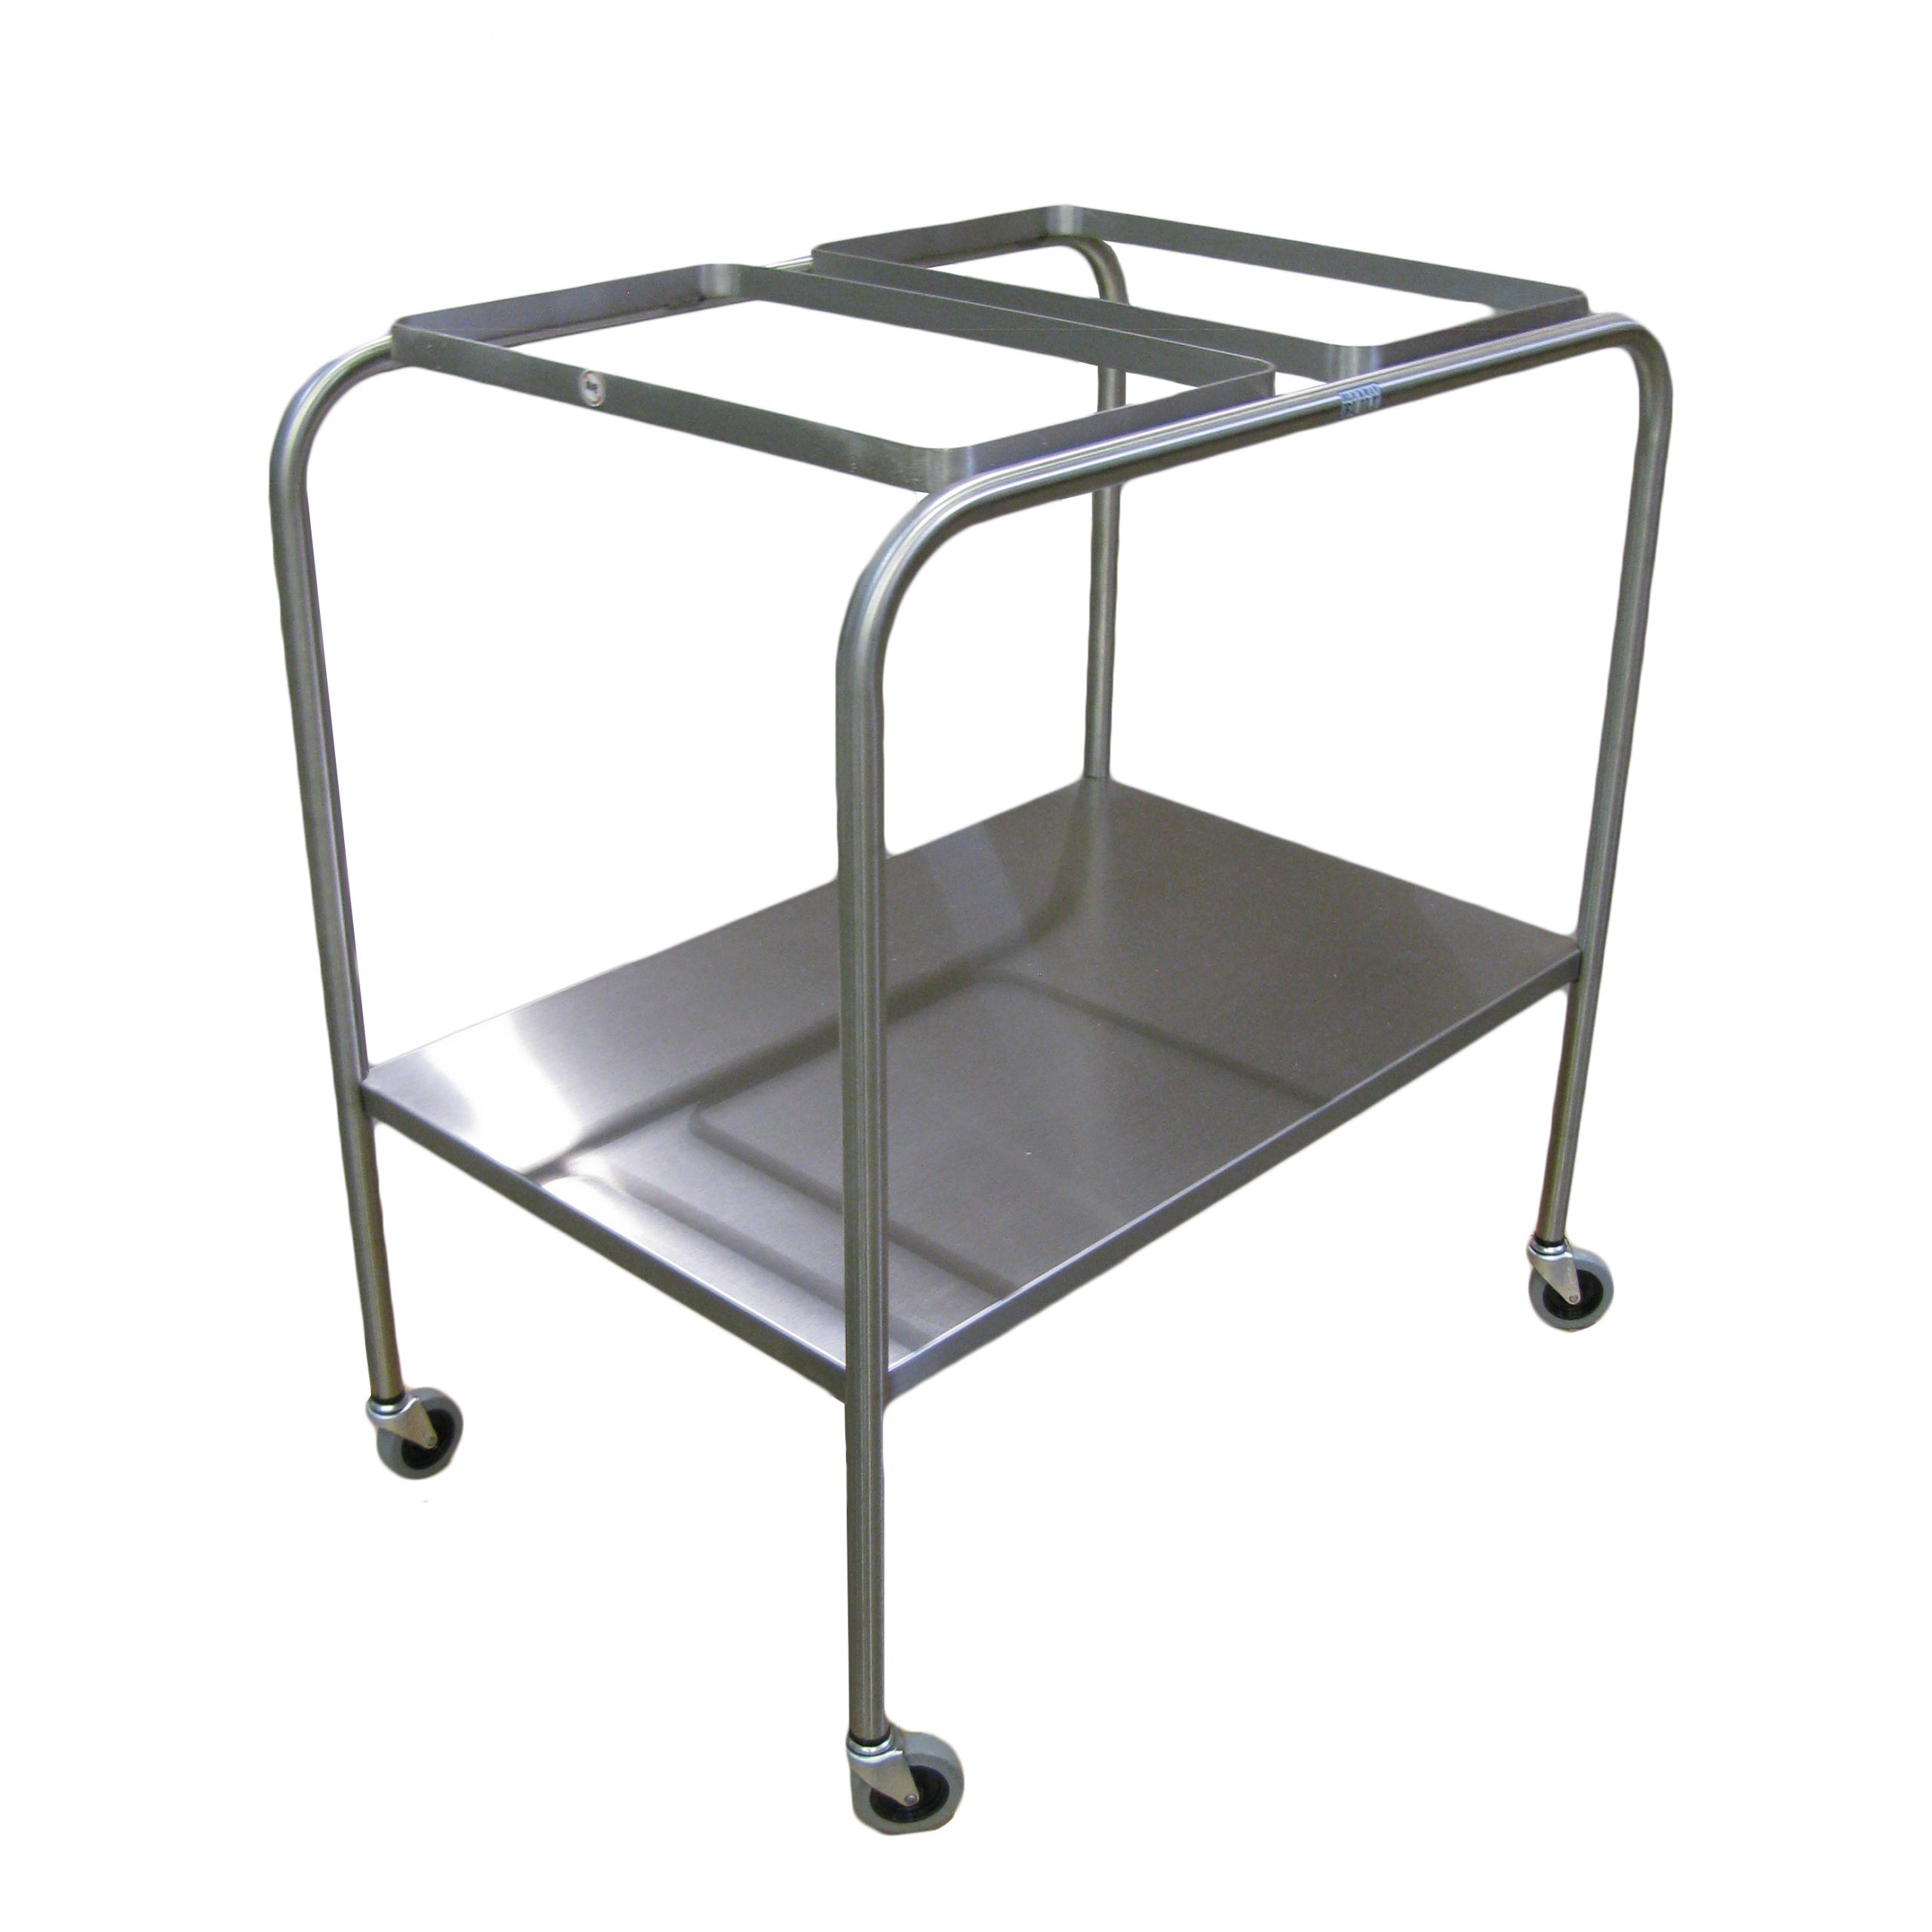 https://www.hmark.com/wp-content/uploads/2020/08/SST-Tray-Stand-scaled.jpg